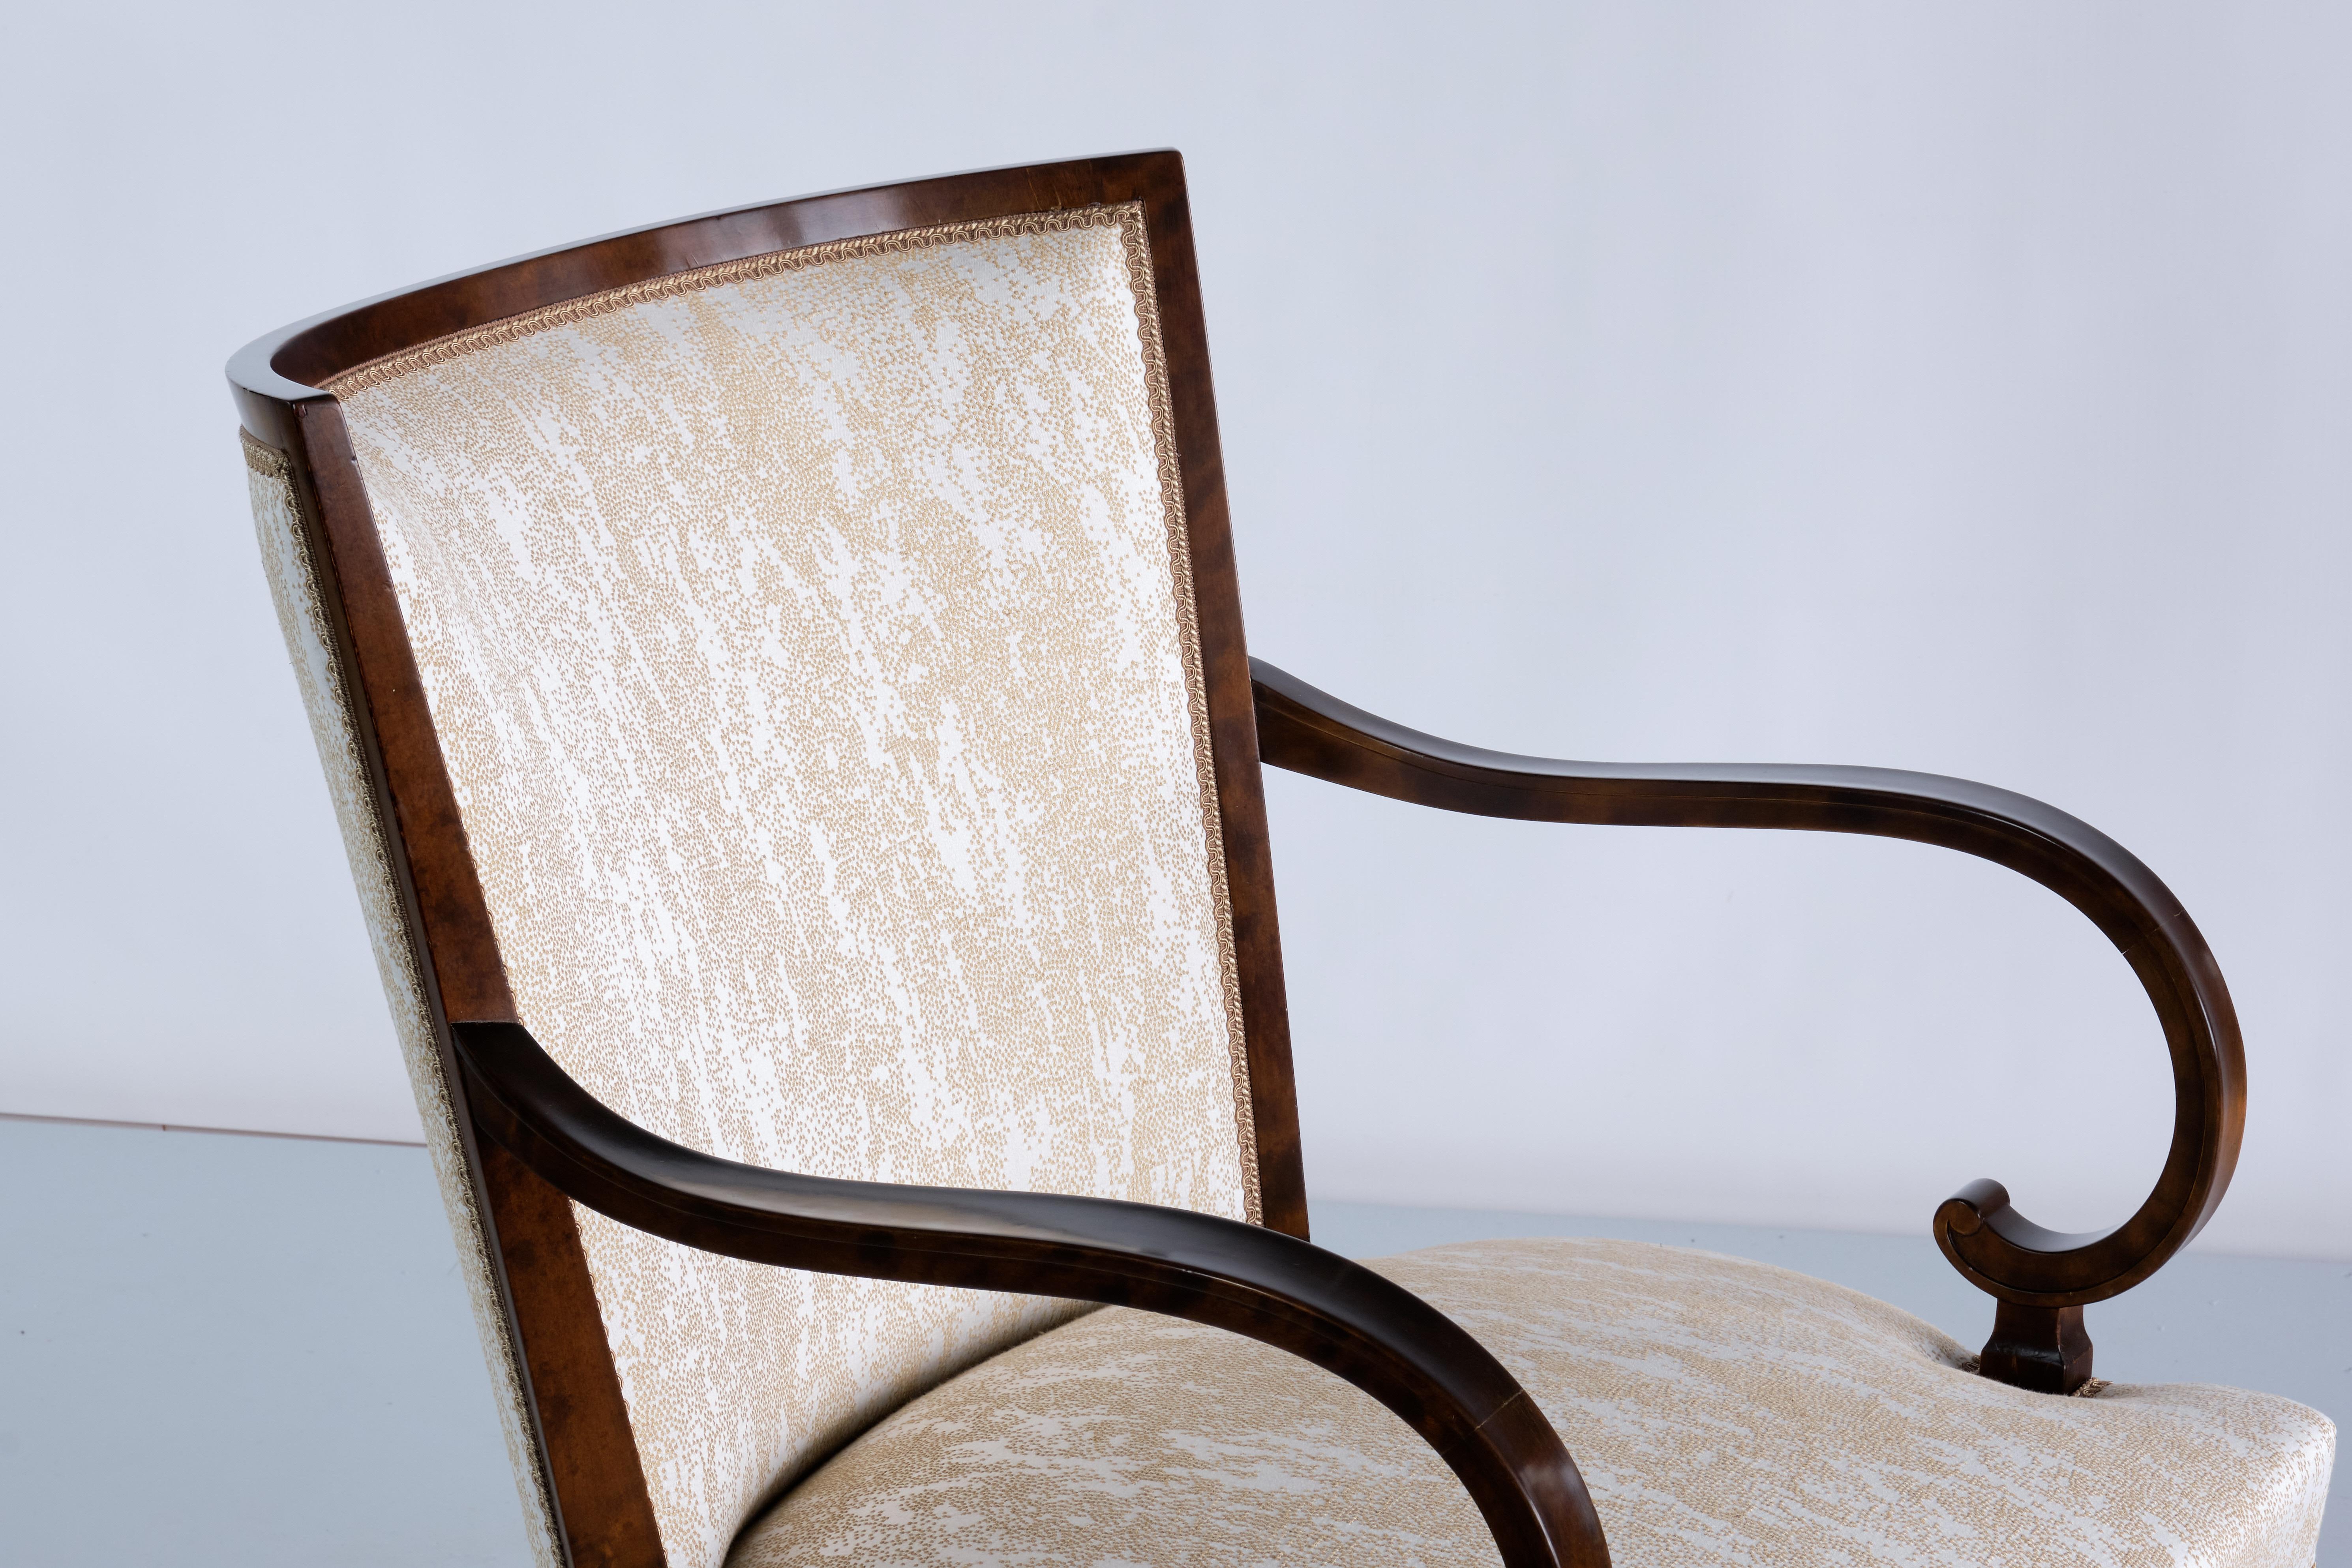 Pair of Carl Malmsten Armchairs in Birch and Satinwood, Bodafors, Sweden, 1930s For Sale 4